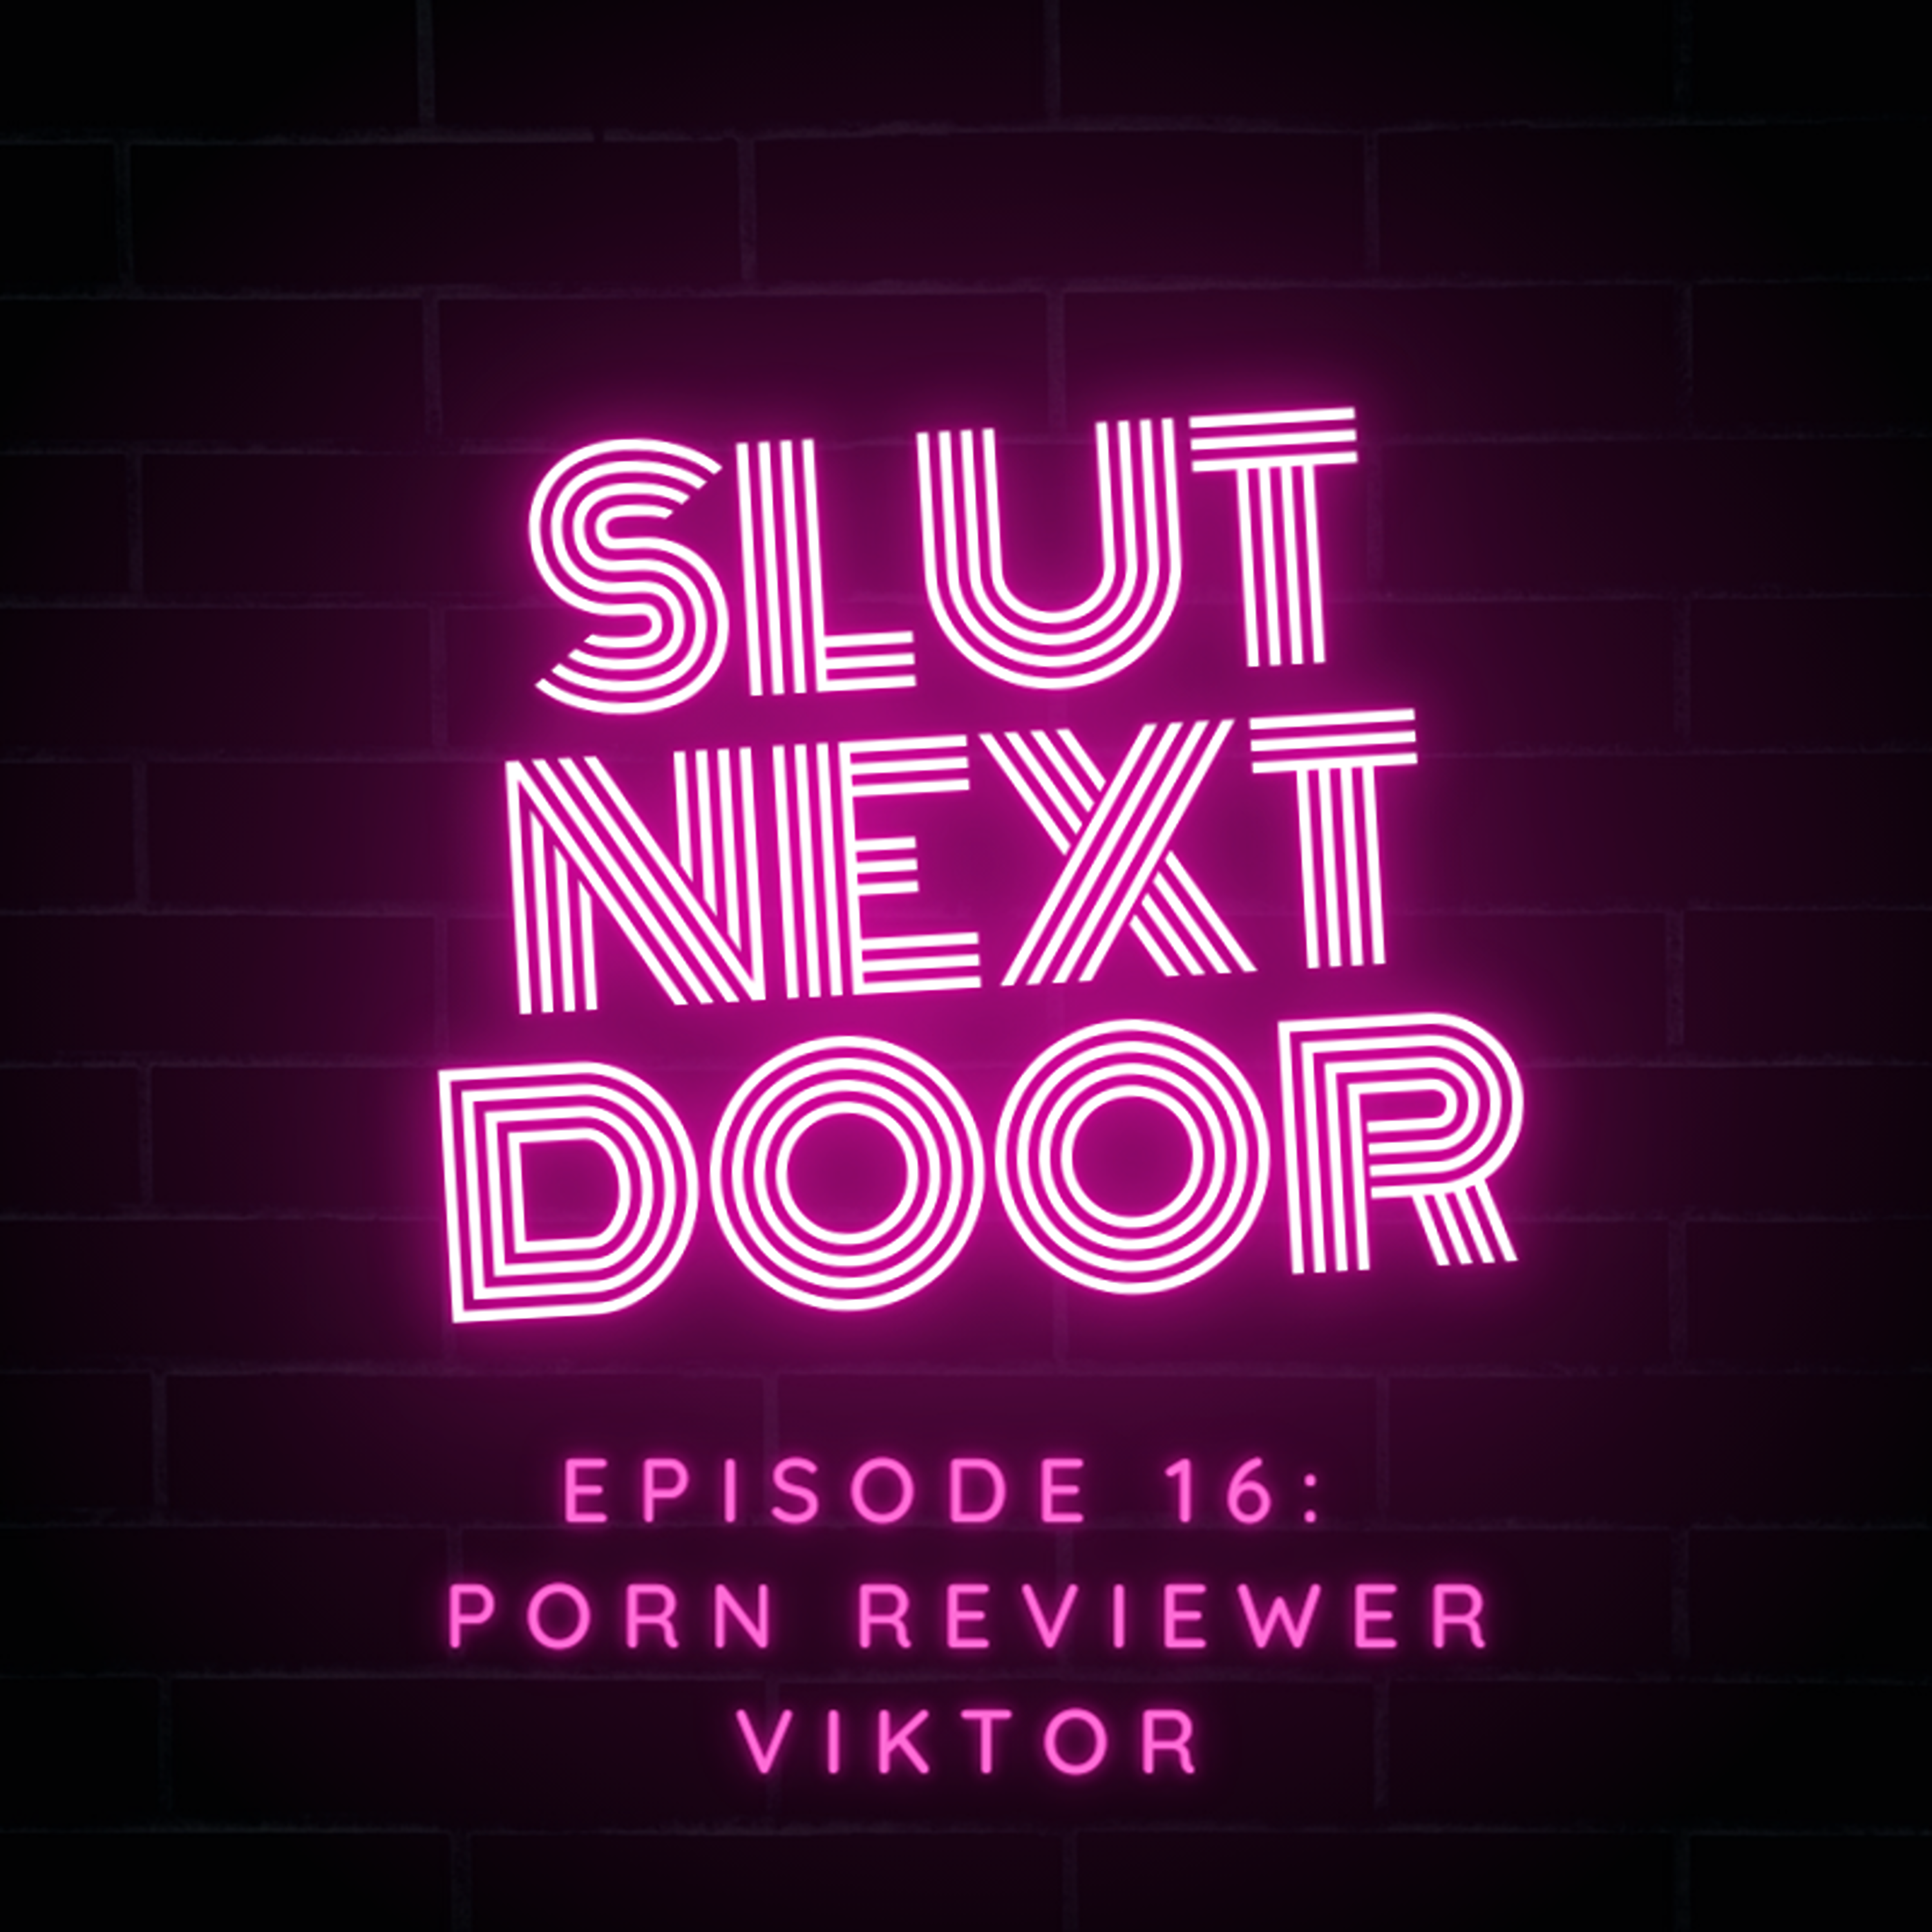 Ep 16 Viktor from theporndude.com